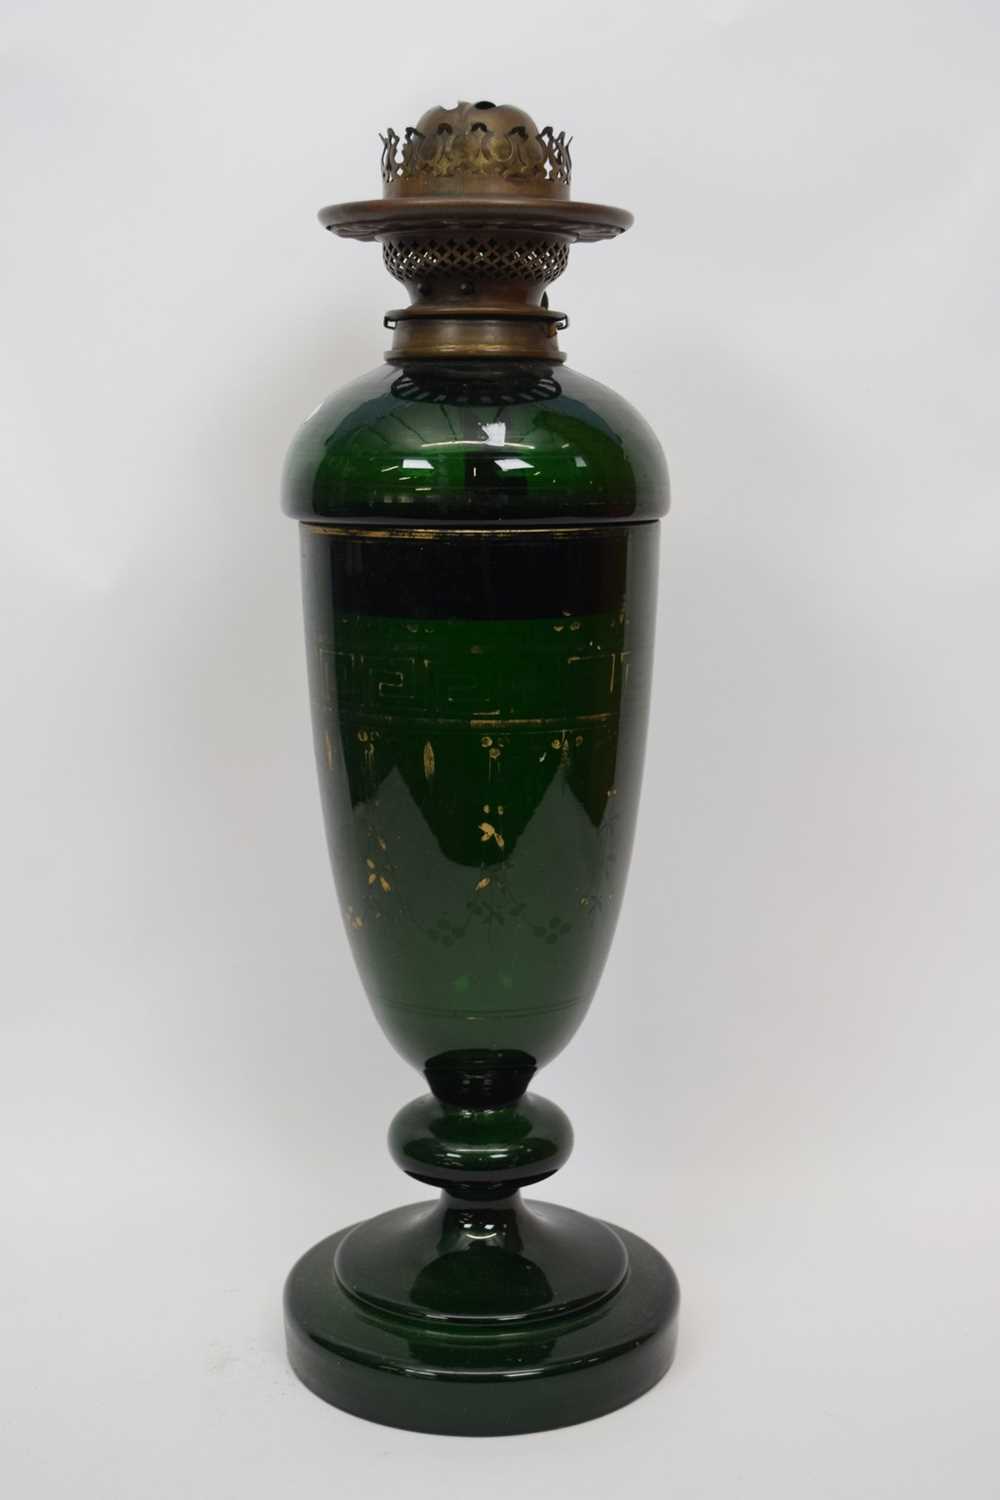 Oil lamp with glass reservoir with Grecian style design (rubbed)